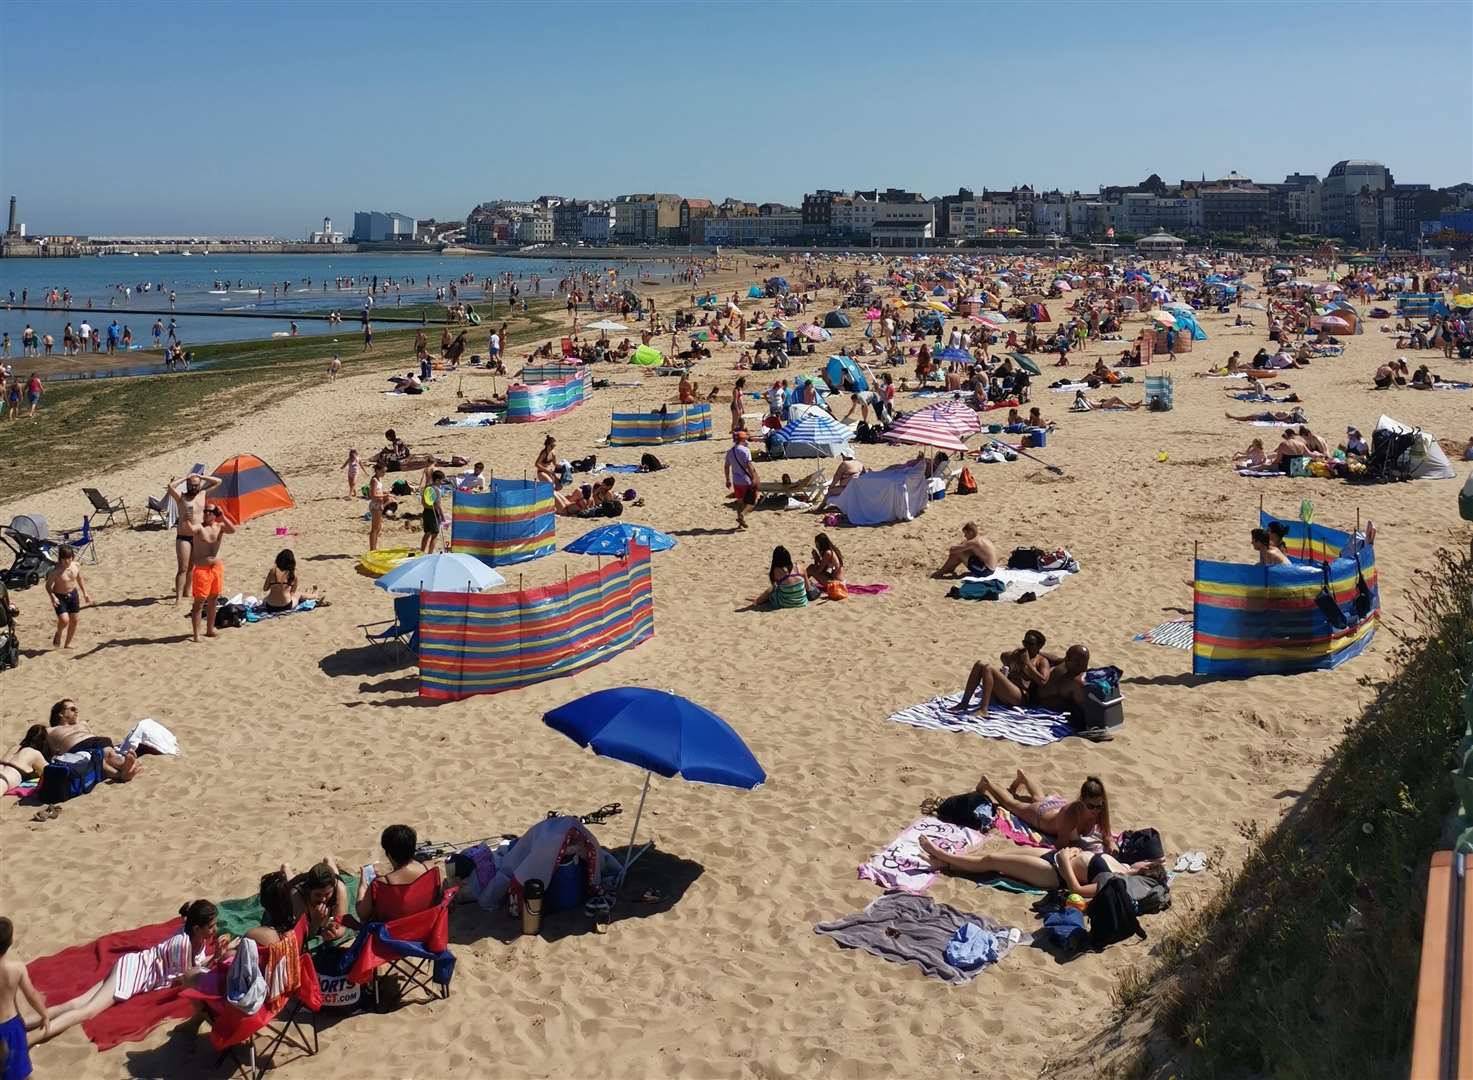 Margate main sands is a popular destination when the sun is shining